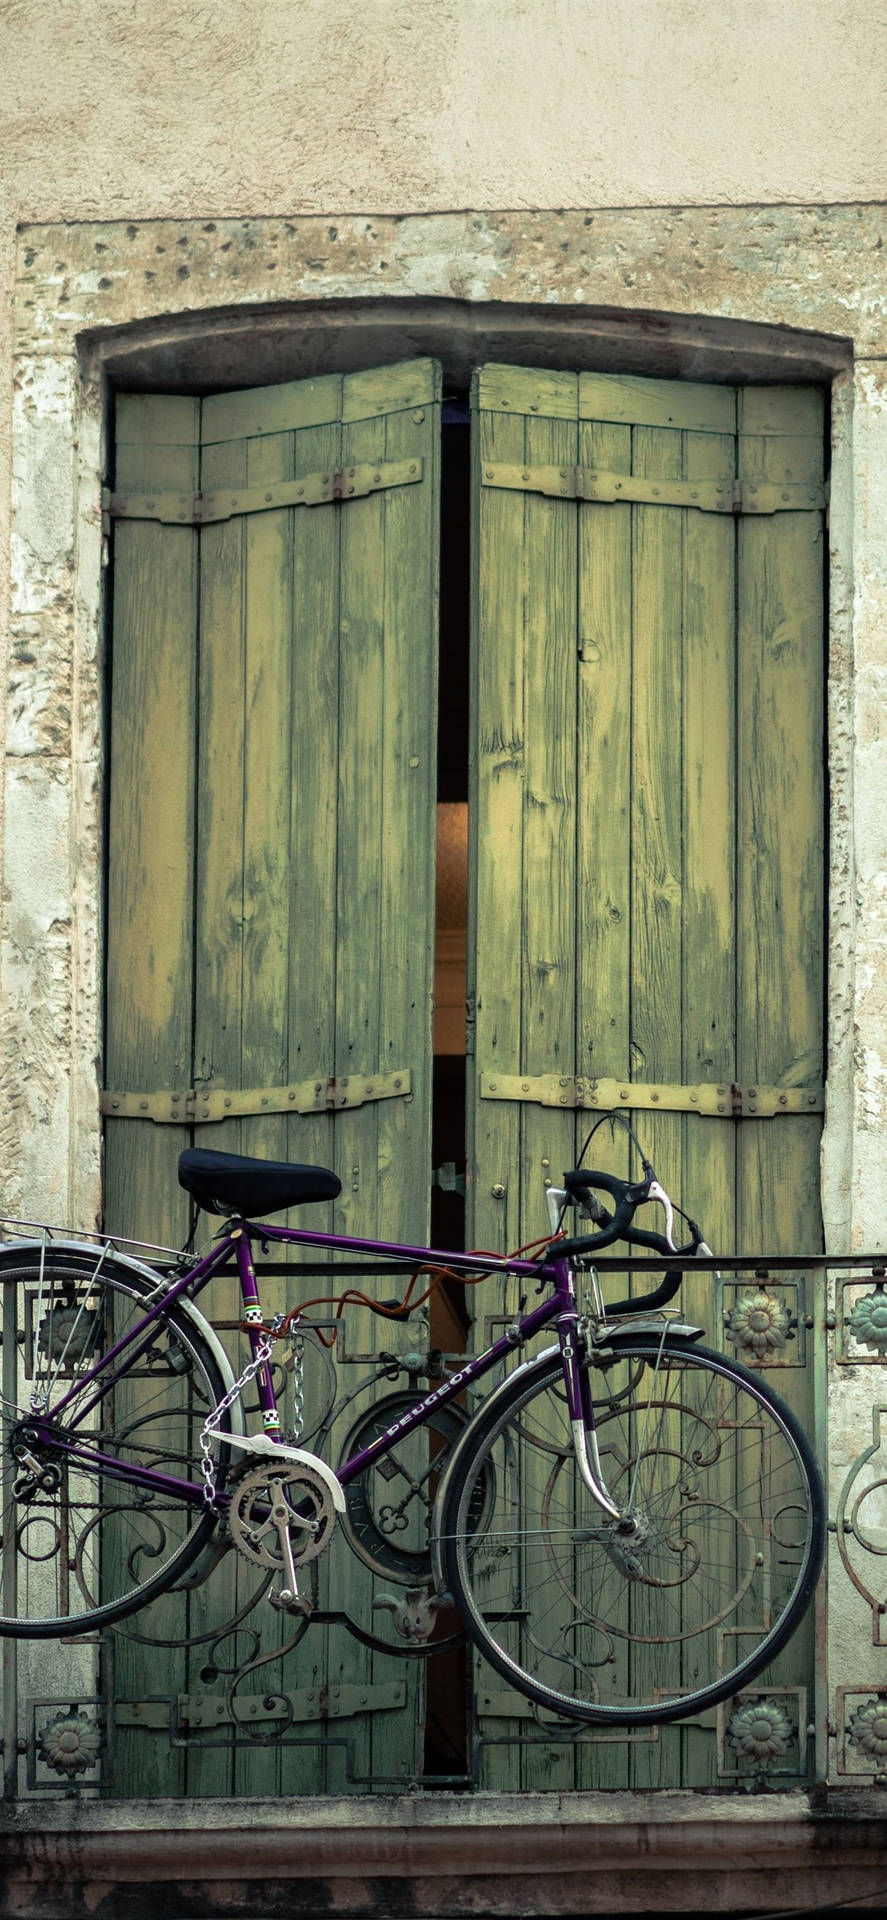 Enjoy the scenery with a Bicycle Iphone Wallpaper